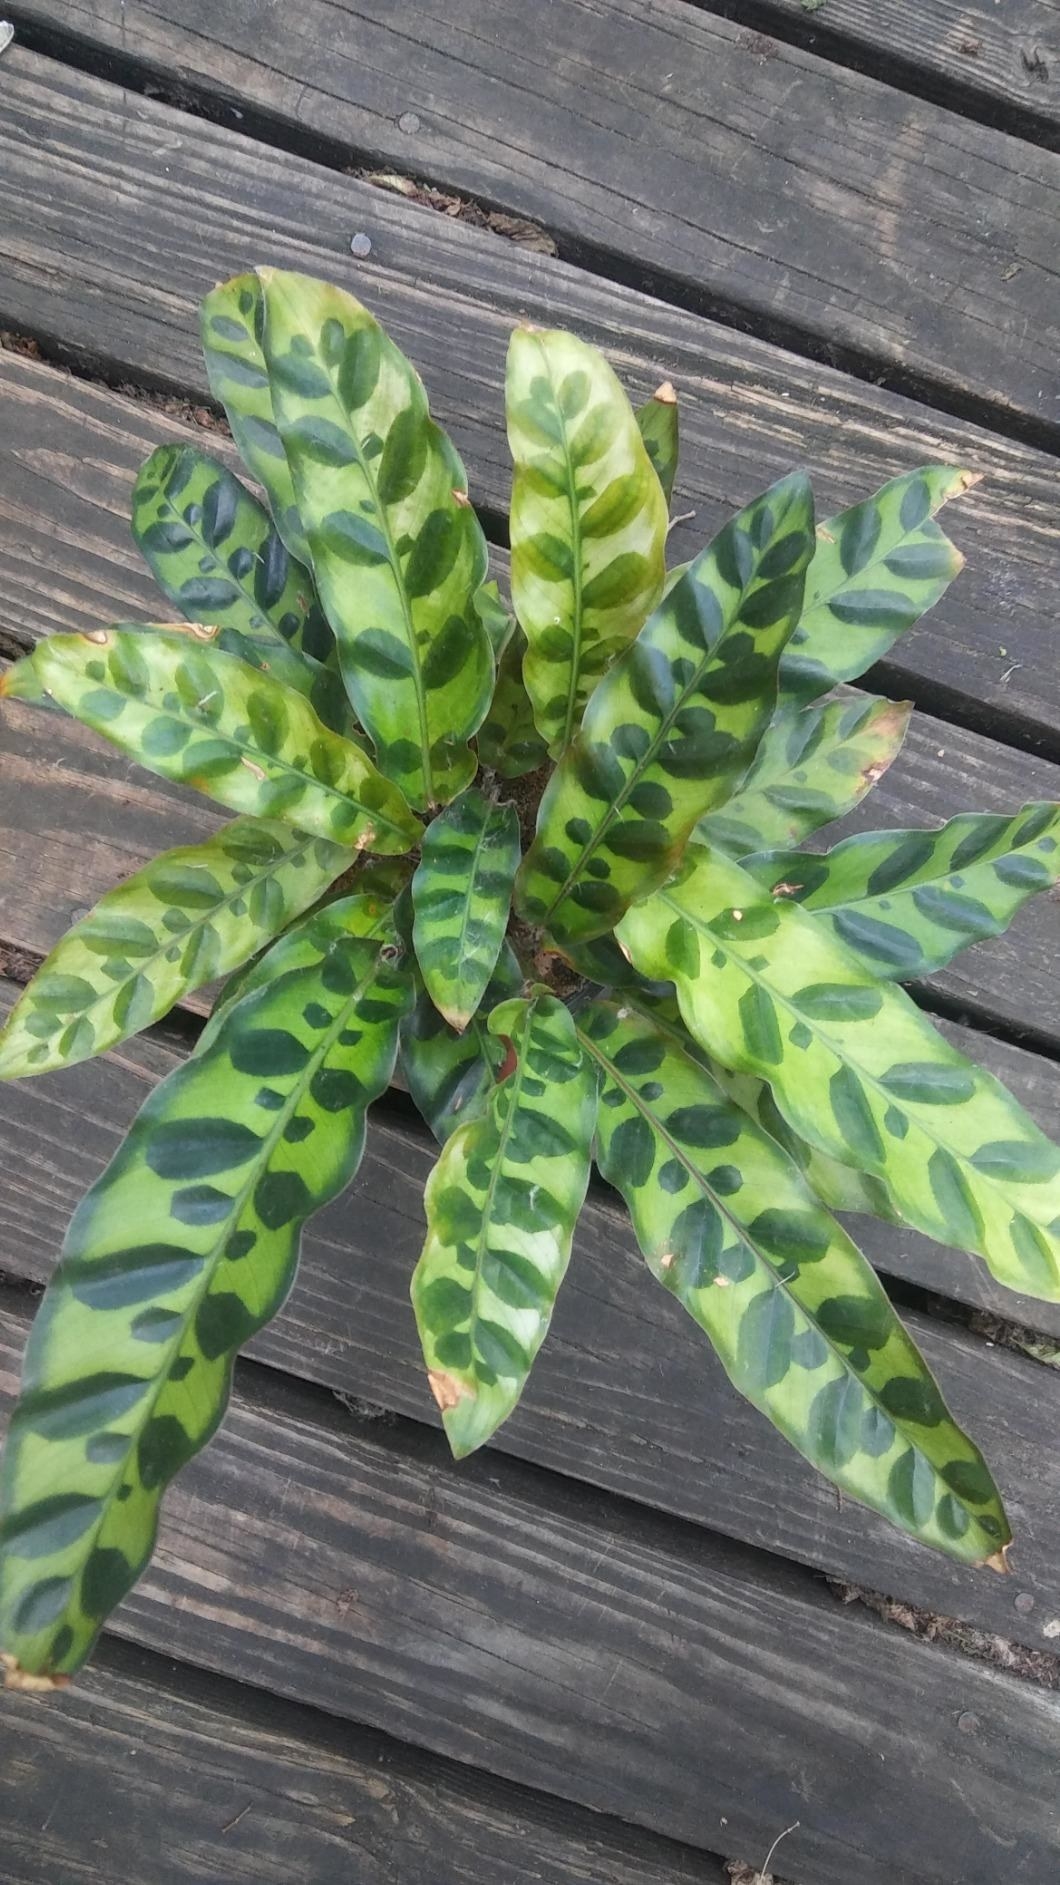 A reviewer showing their plant with large, lush green spotted leaves